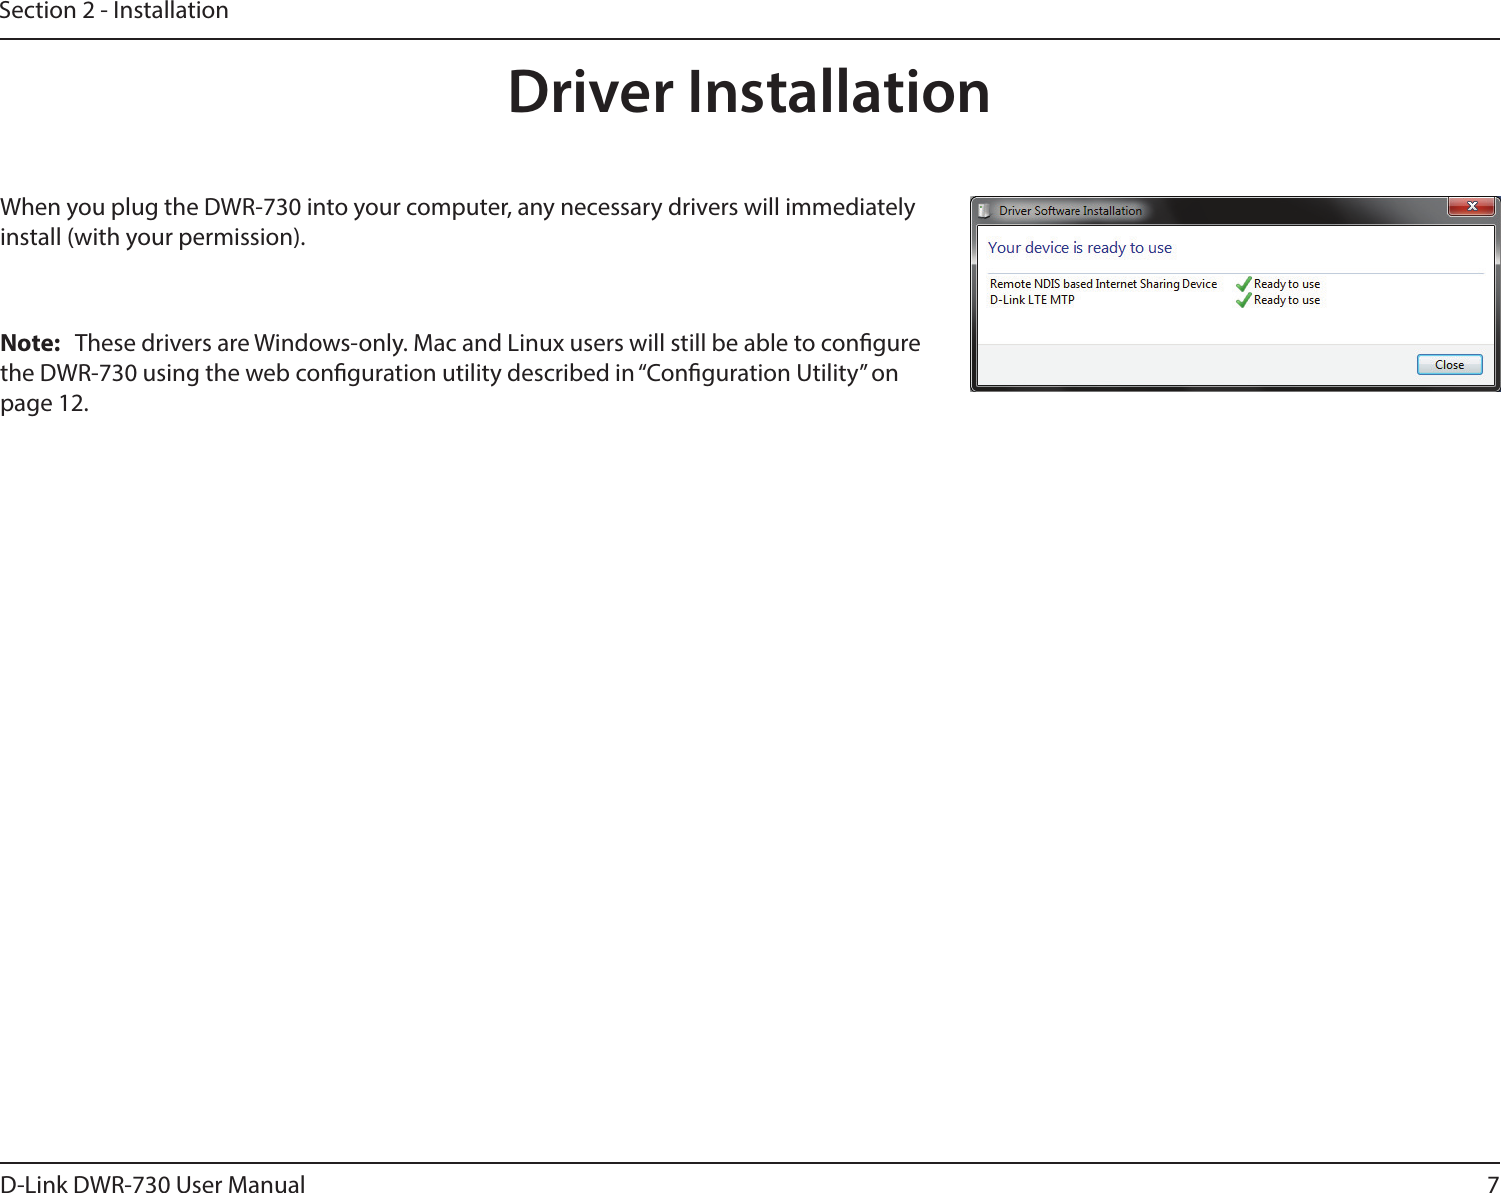 7D-Link DWR-730 User ManualSection 2 - InstallationDriver InstallationWhen you plug the DWR-730 into your computer, any necessary drivers will immediately install (with your permission).Note:  These drivers are Windows-only. Mac and Linux users will still be able to congure the DWR-730 using the web conguration utility described in “Conguration Utility” on page 12.